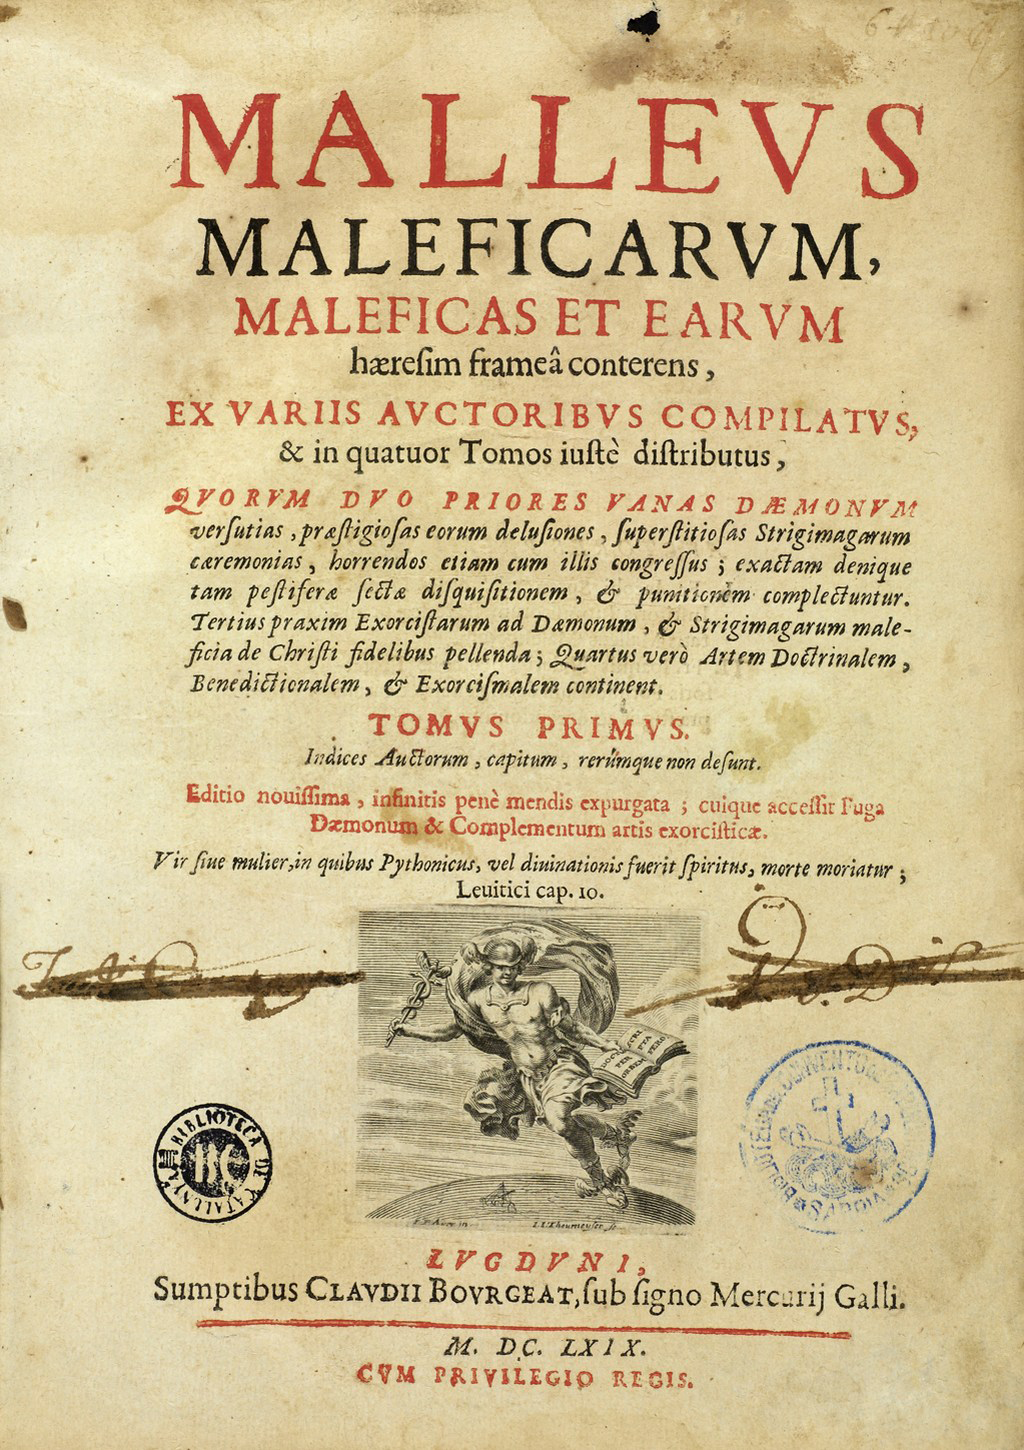 Title page of the Malleus Maleficarum (Hammer of Witches), the main treatise on witchcraft © http://wellcomeimages.org/indexplus/obf_images/9b/44/a3099ffc223cb9f244846af2909a.jpg